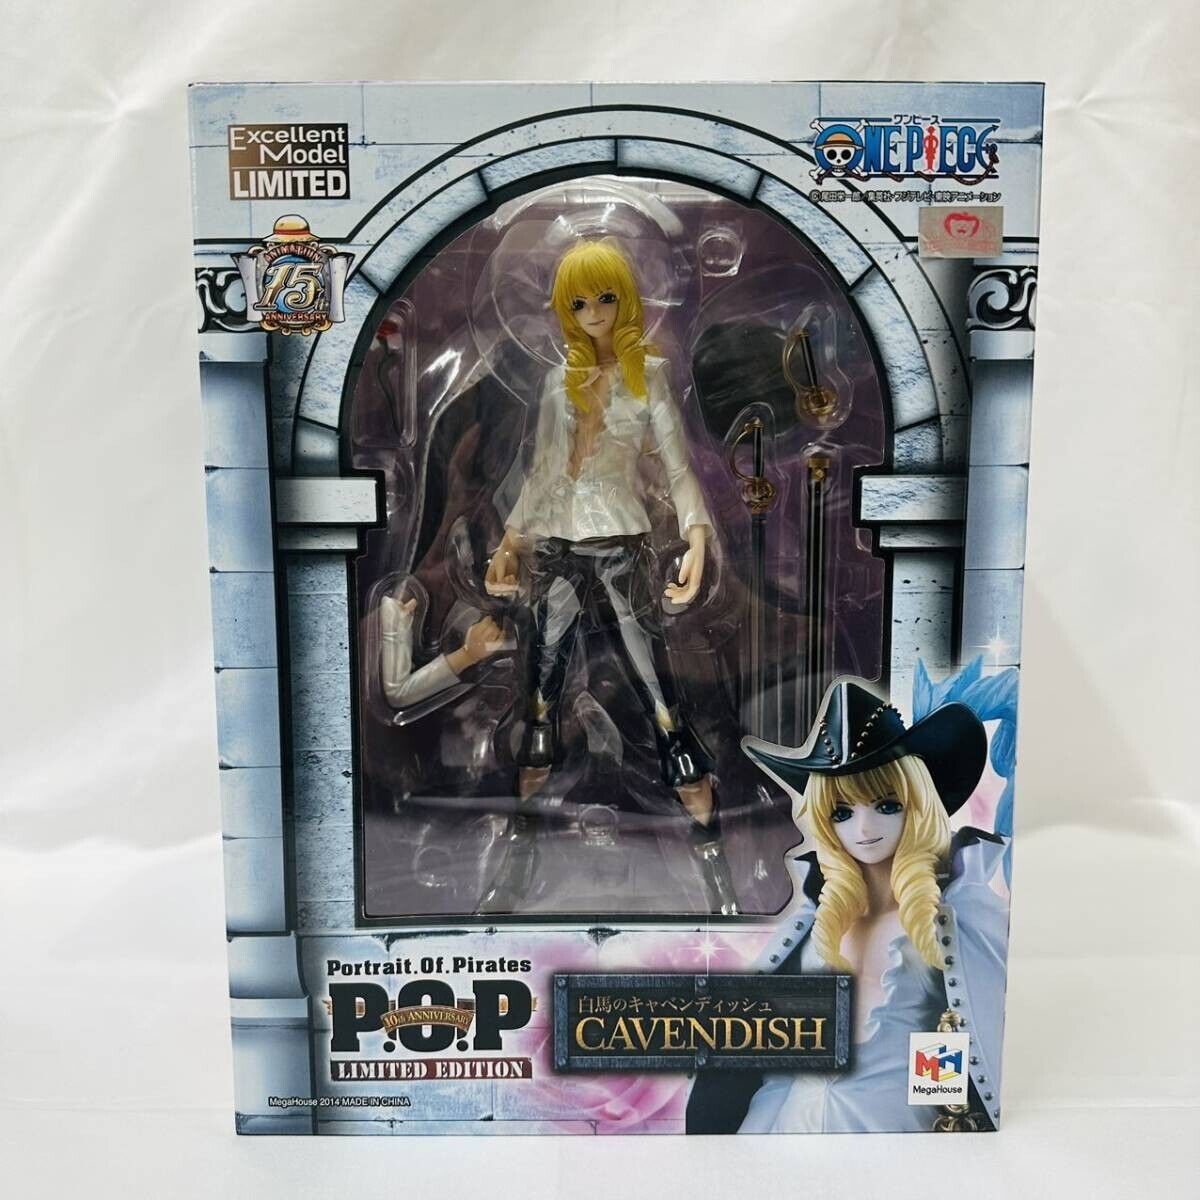 Magnificent Portrait.Of.Pirates One Piece LIMITED EDITION Cavendish Excellent Model Figure on eBay